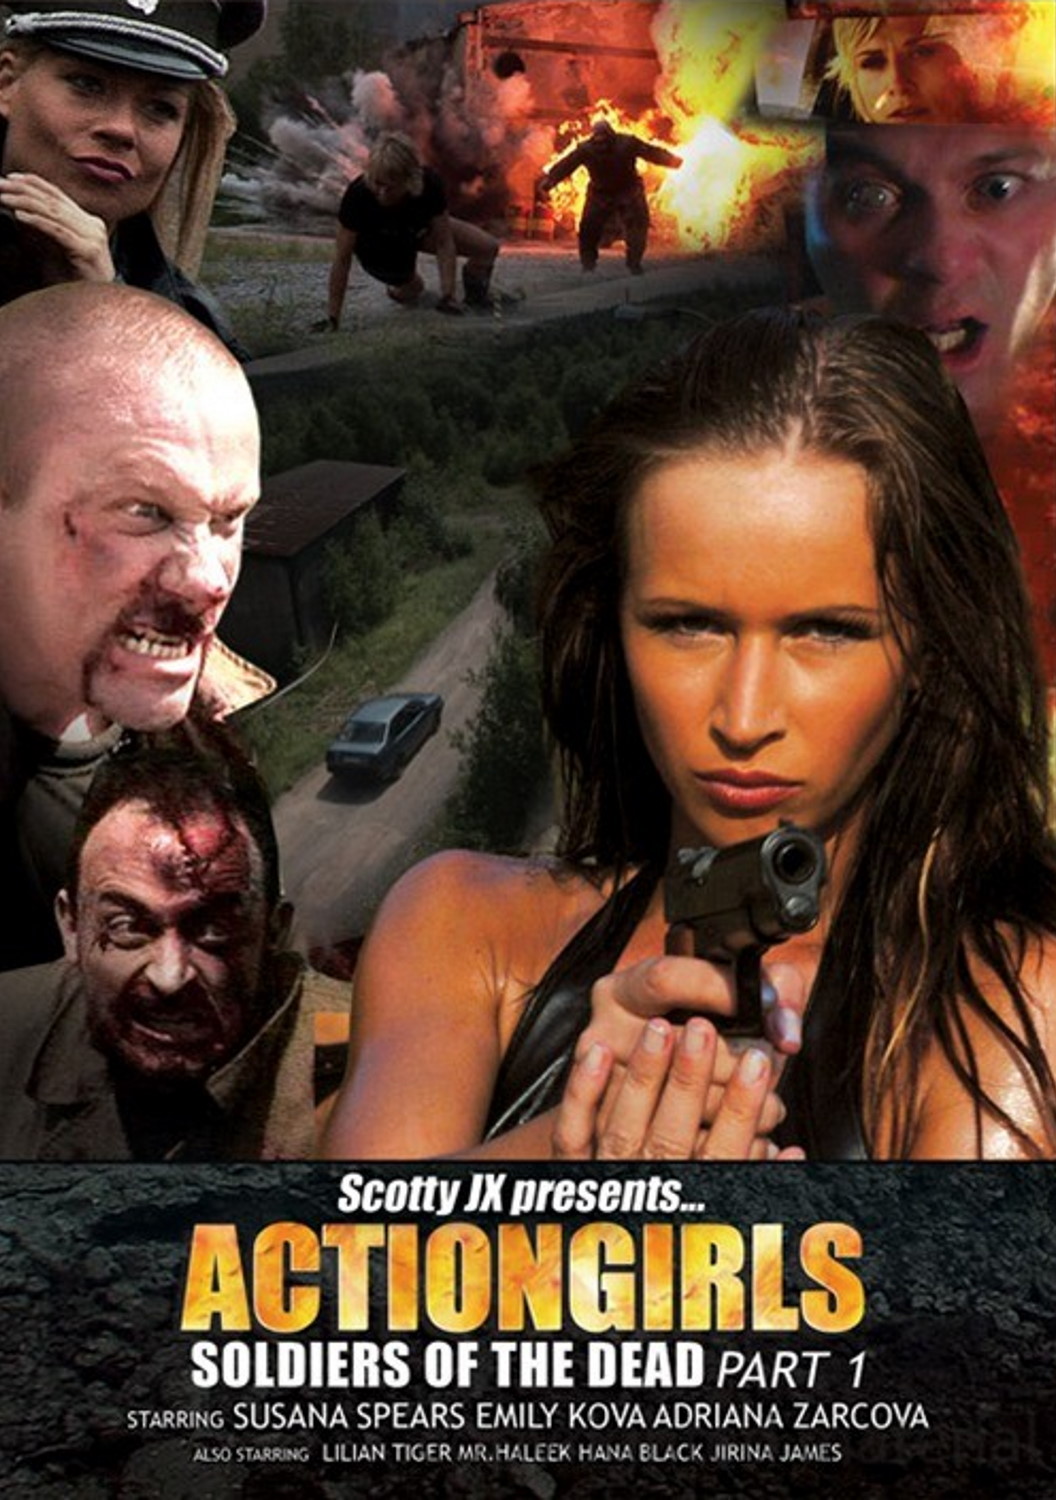 Actiongirls: Soldiers of the Dead – Part 1 (2007) Poster